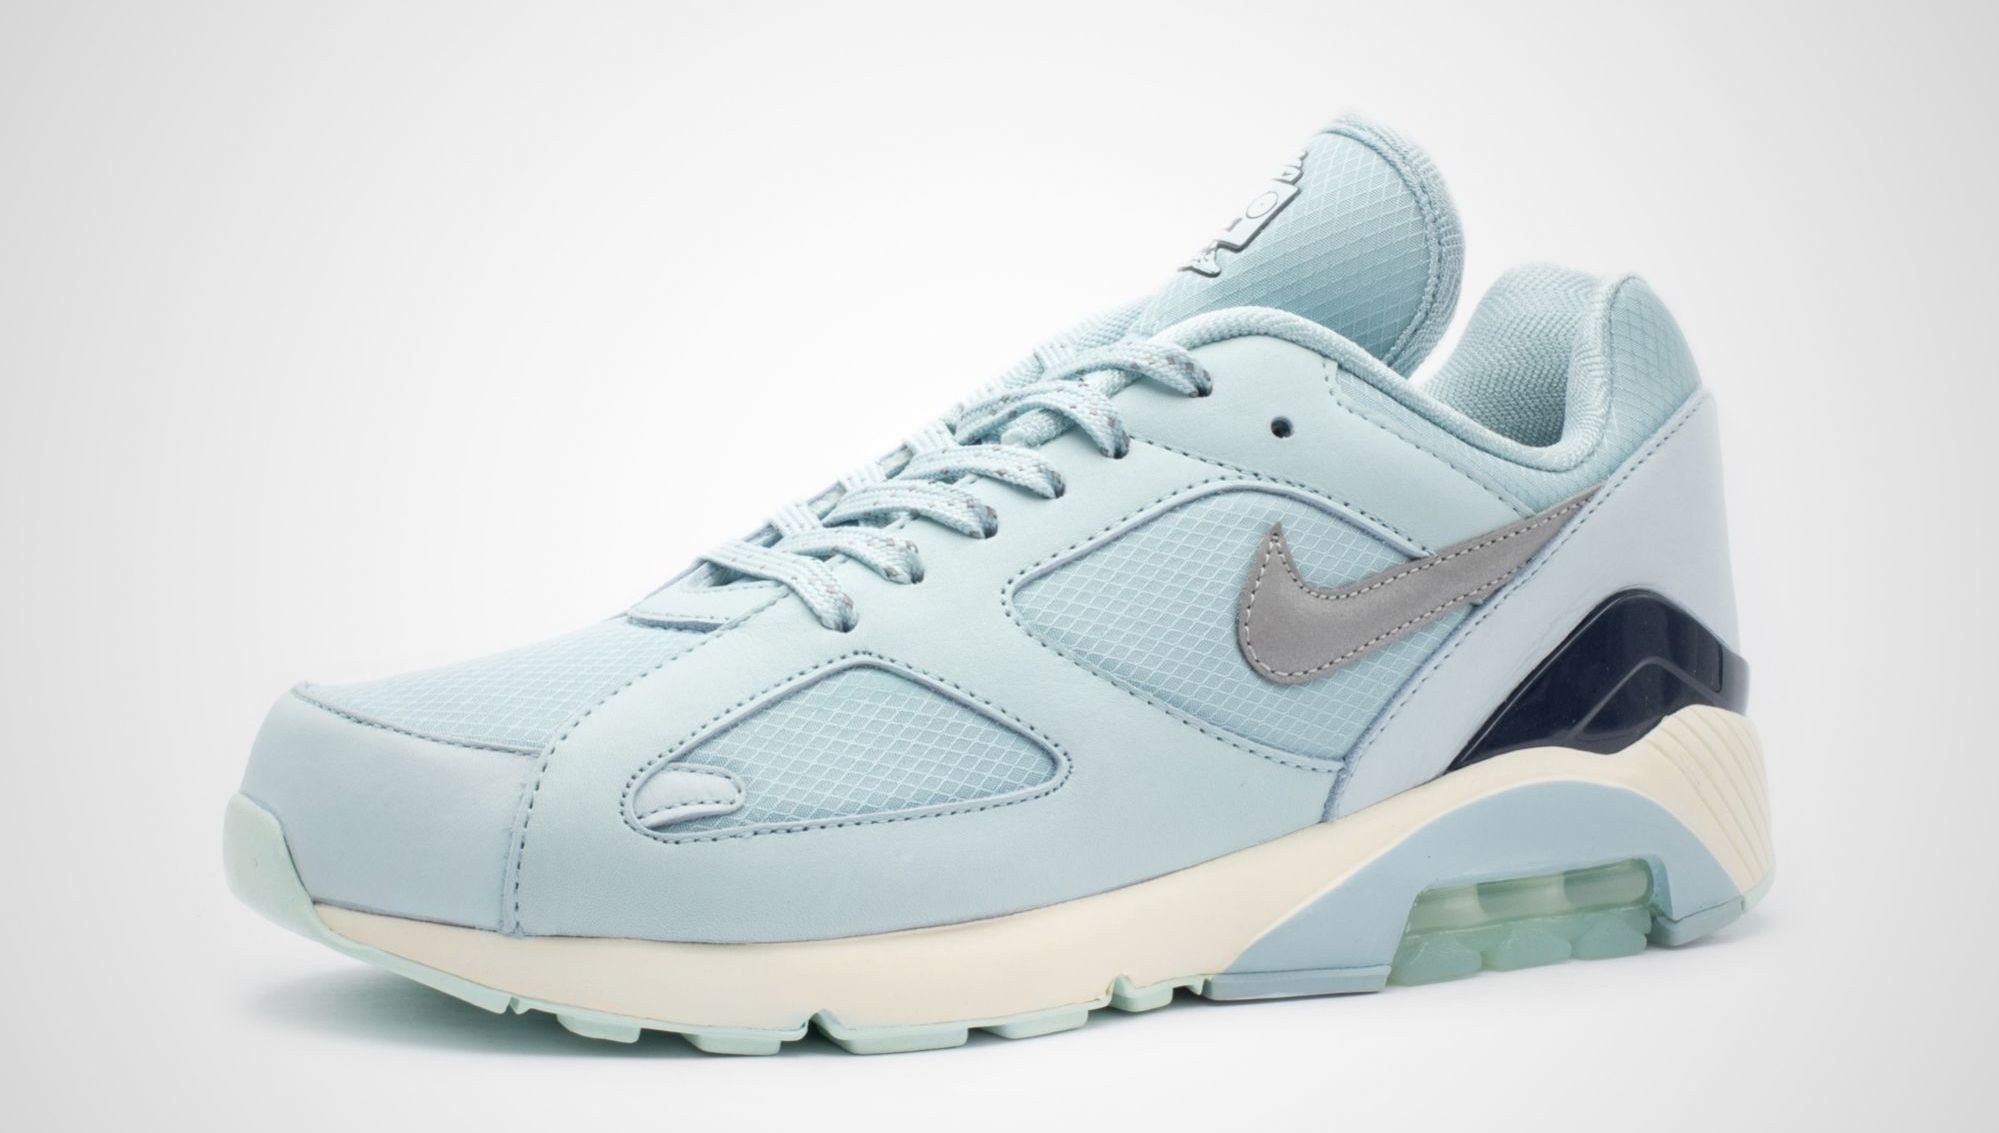 Nike 'Ice' Air Max 180 'Fire Ice' Pack | Complex